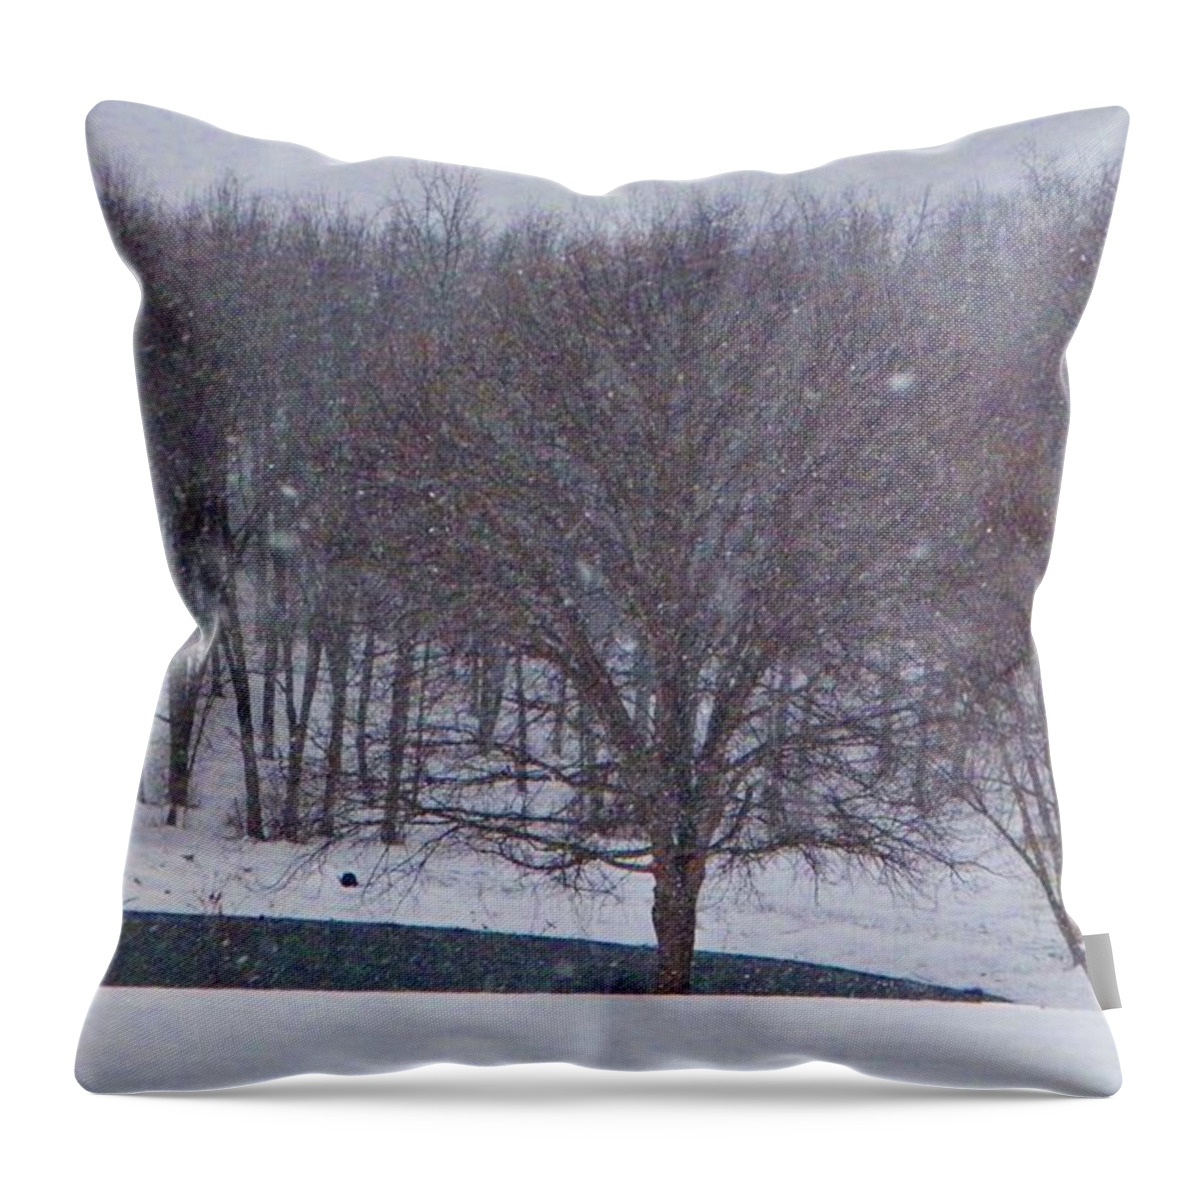 Snow Throw Pillow featuring the photograph Snow Day by Chris Berry